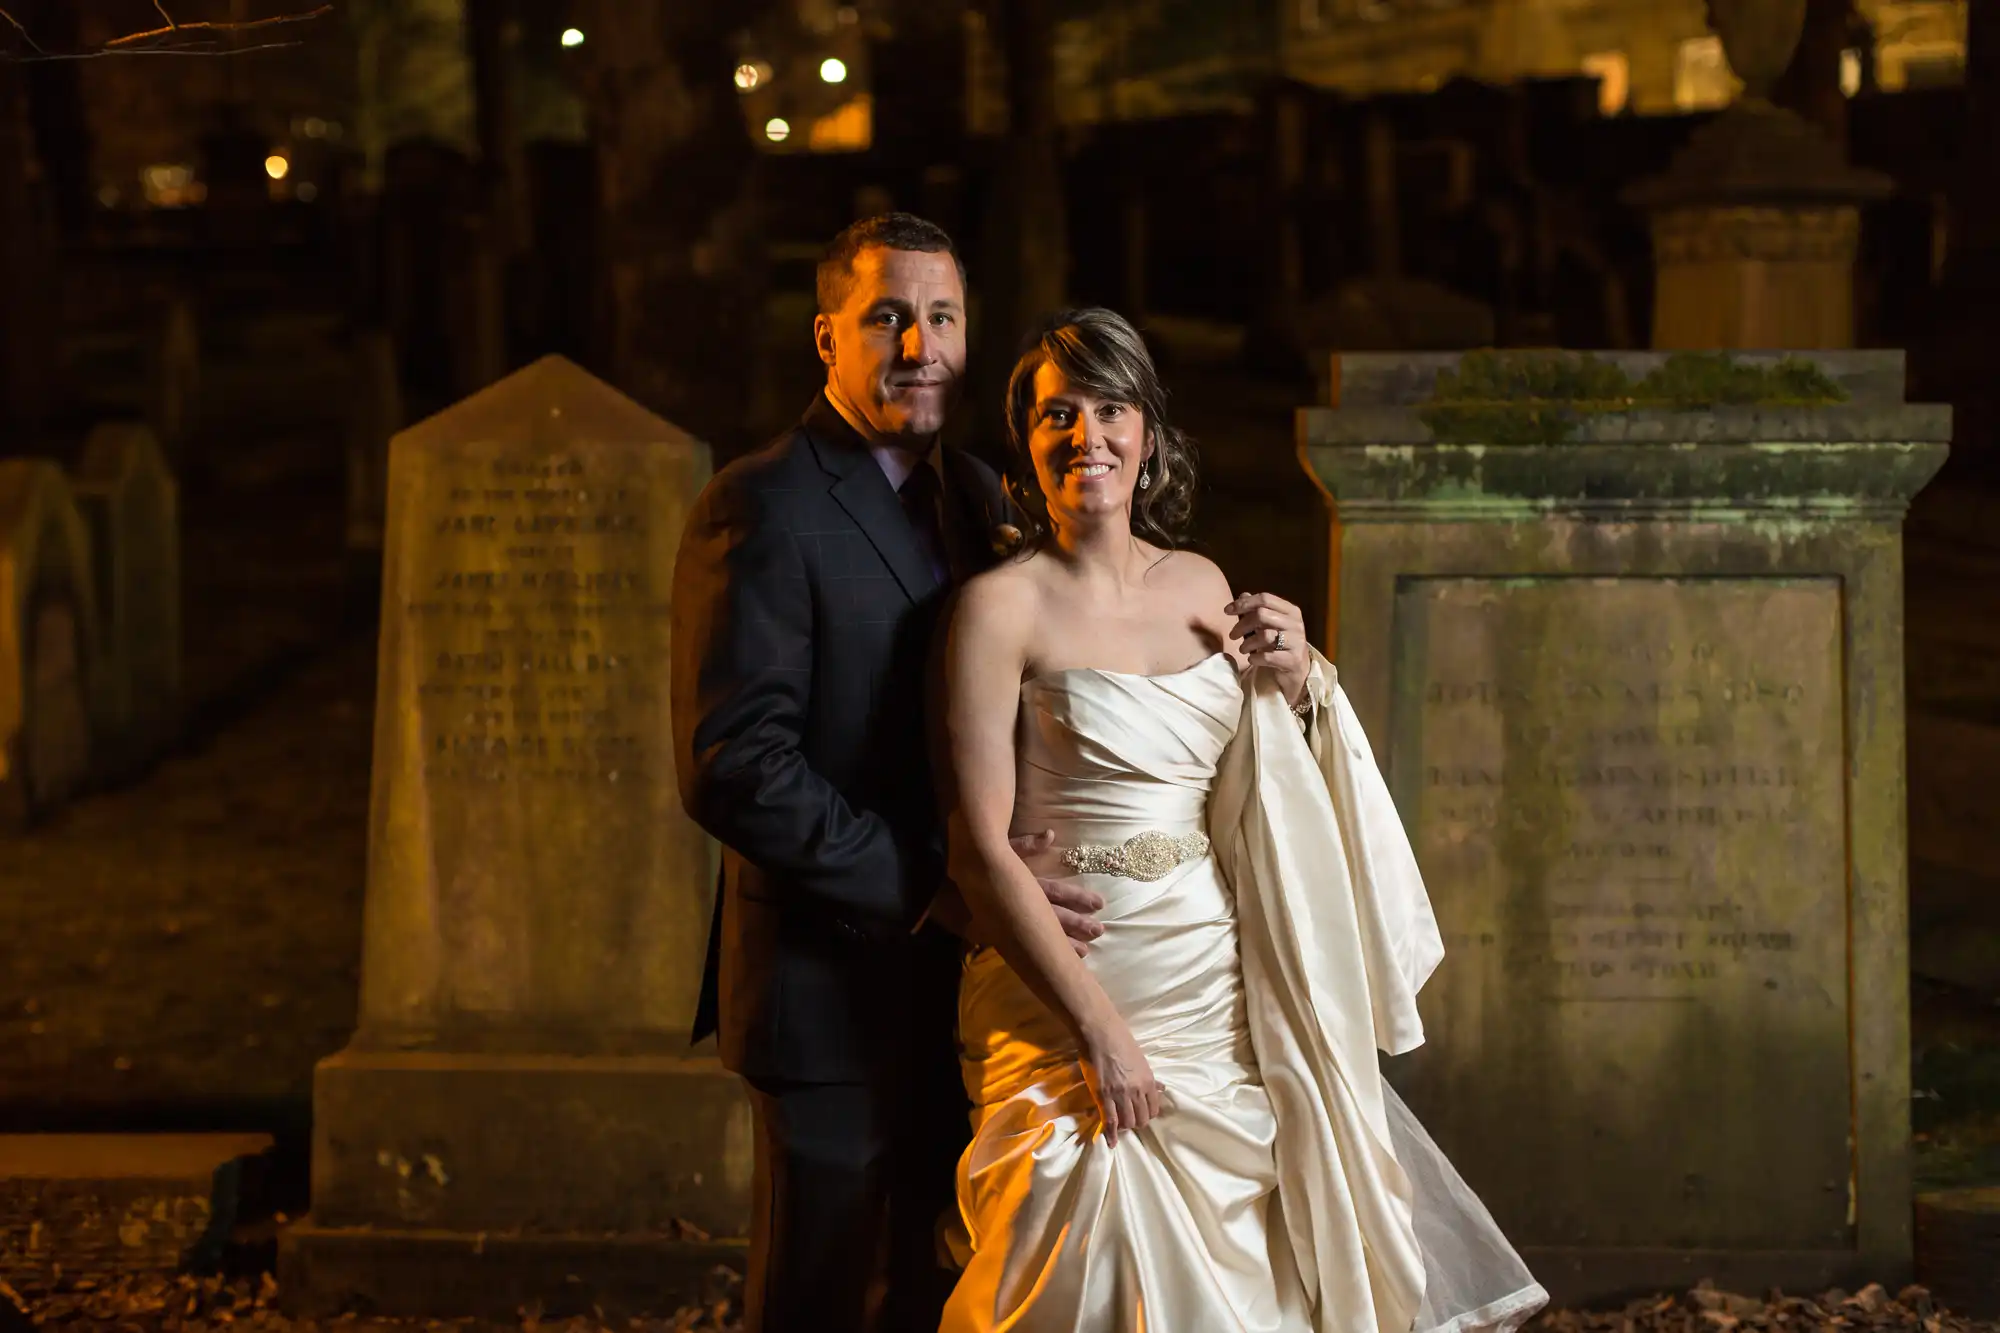 A bride and groom posing at night in a cemetery, standing between tombstones, the woman in a white dress and the man in a dark suit.